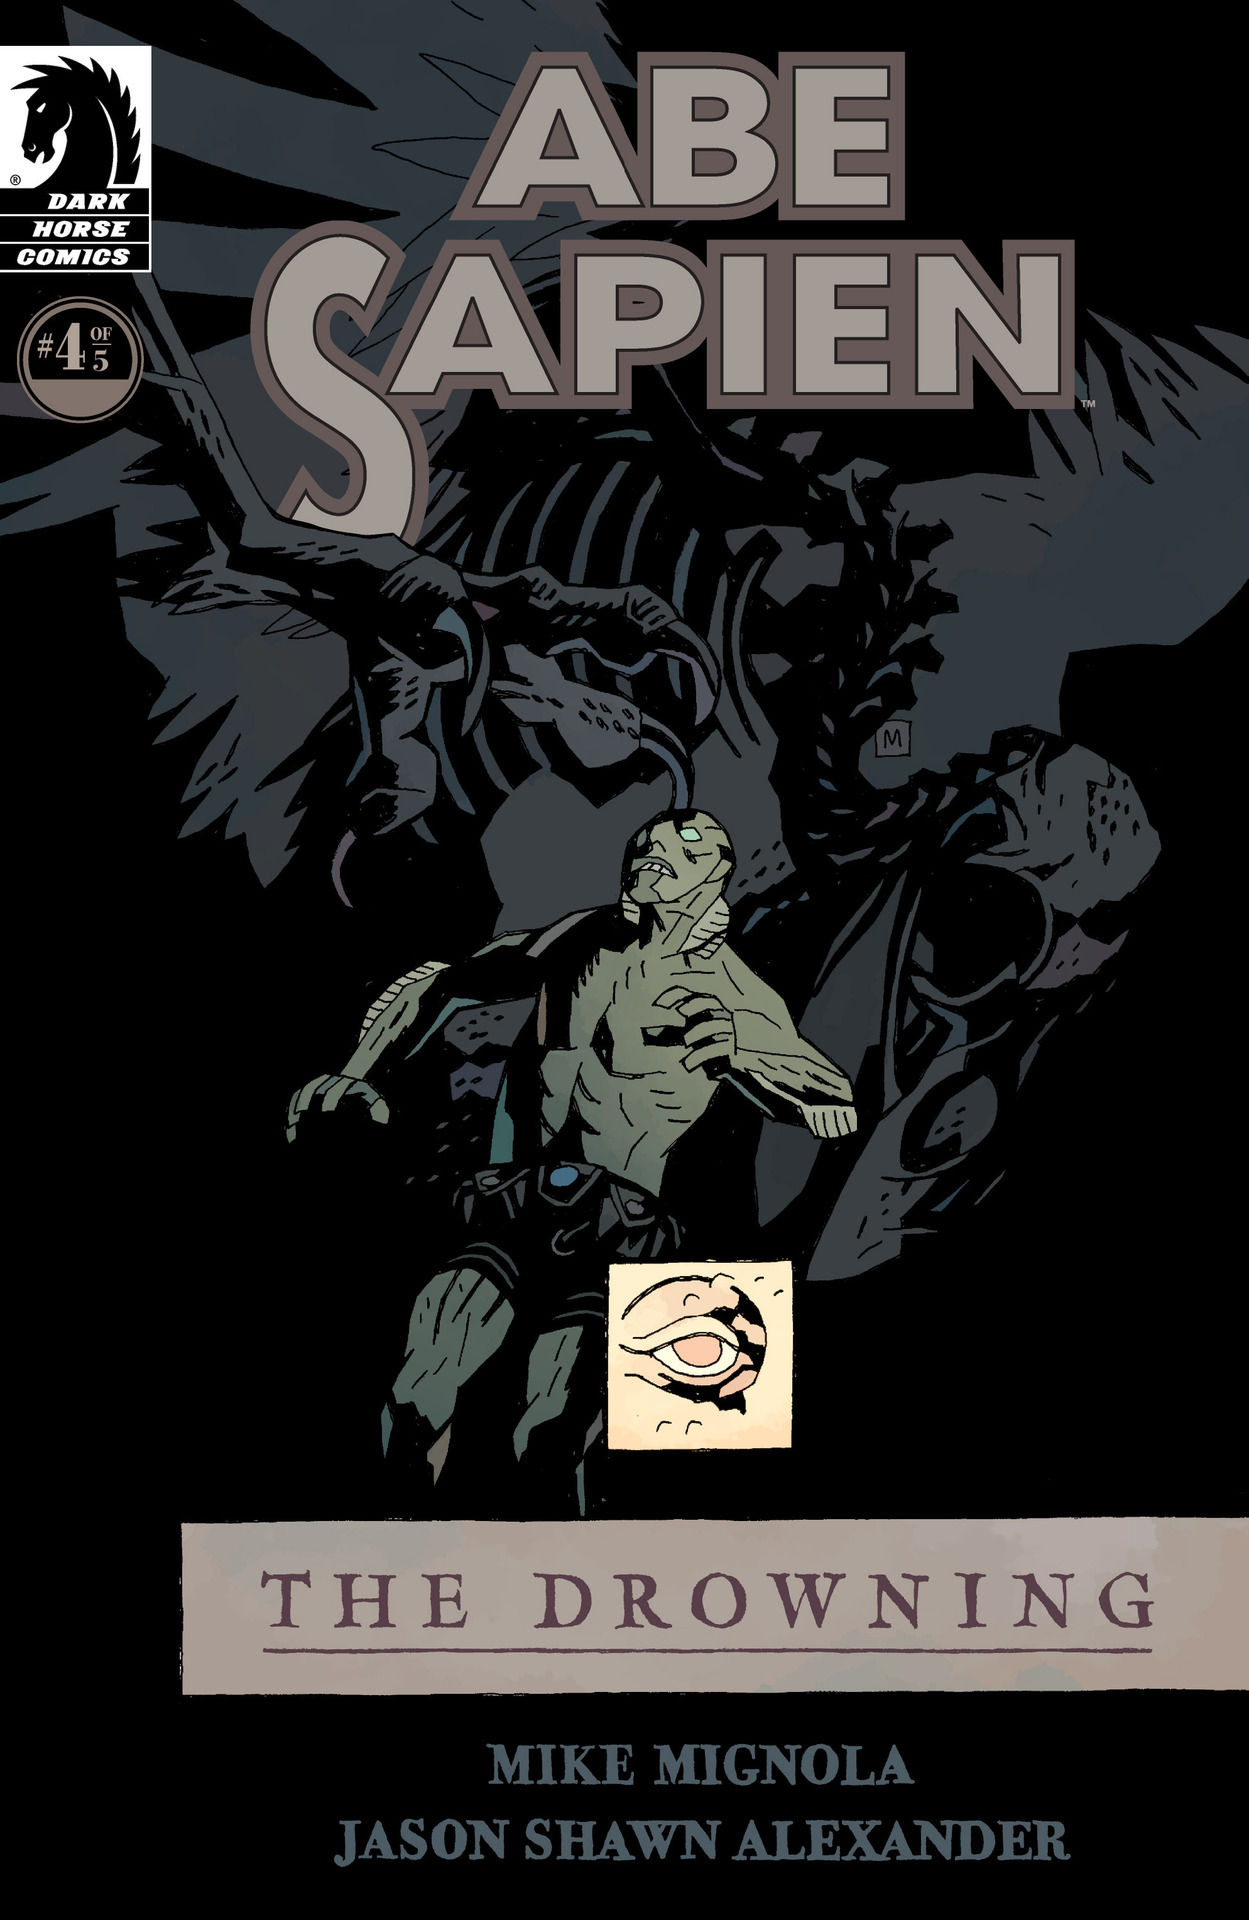 Abe Sapien the Drowning #4